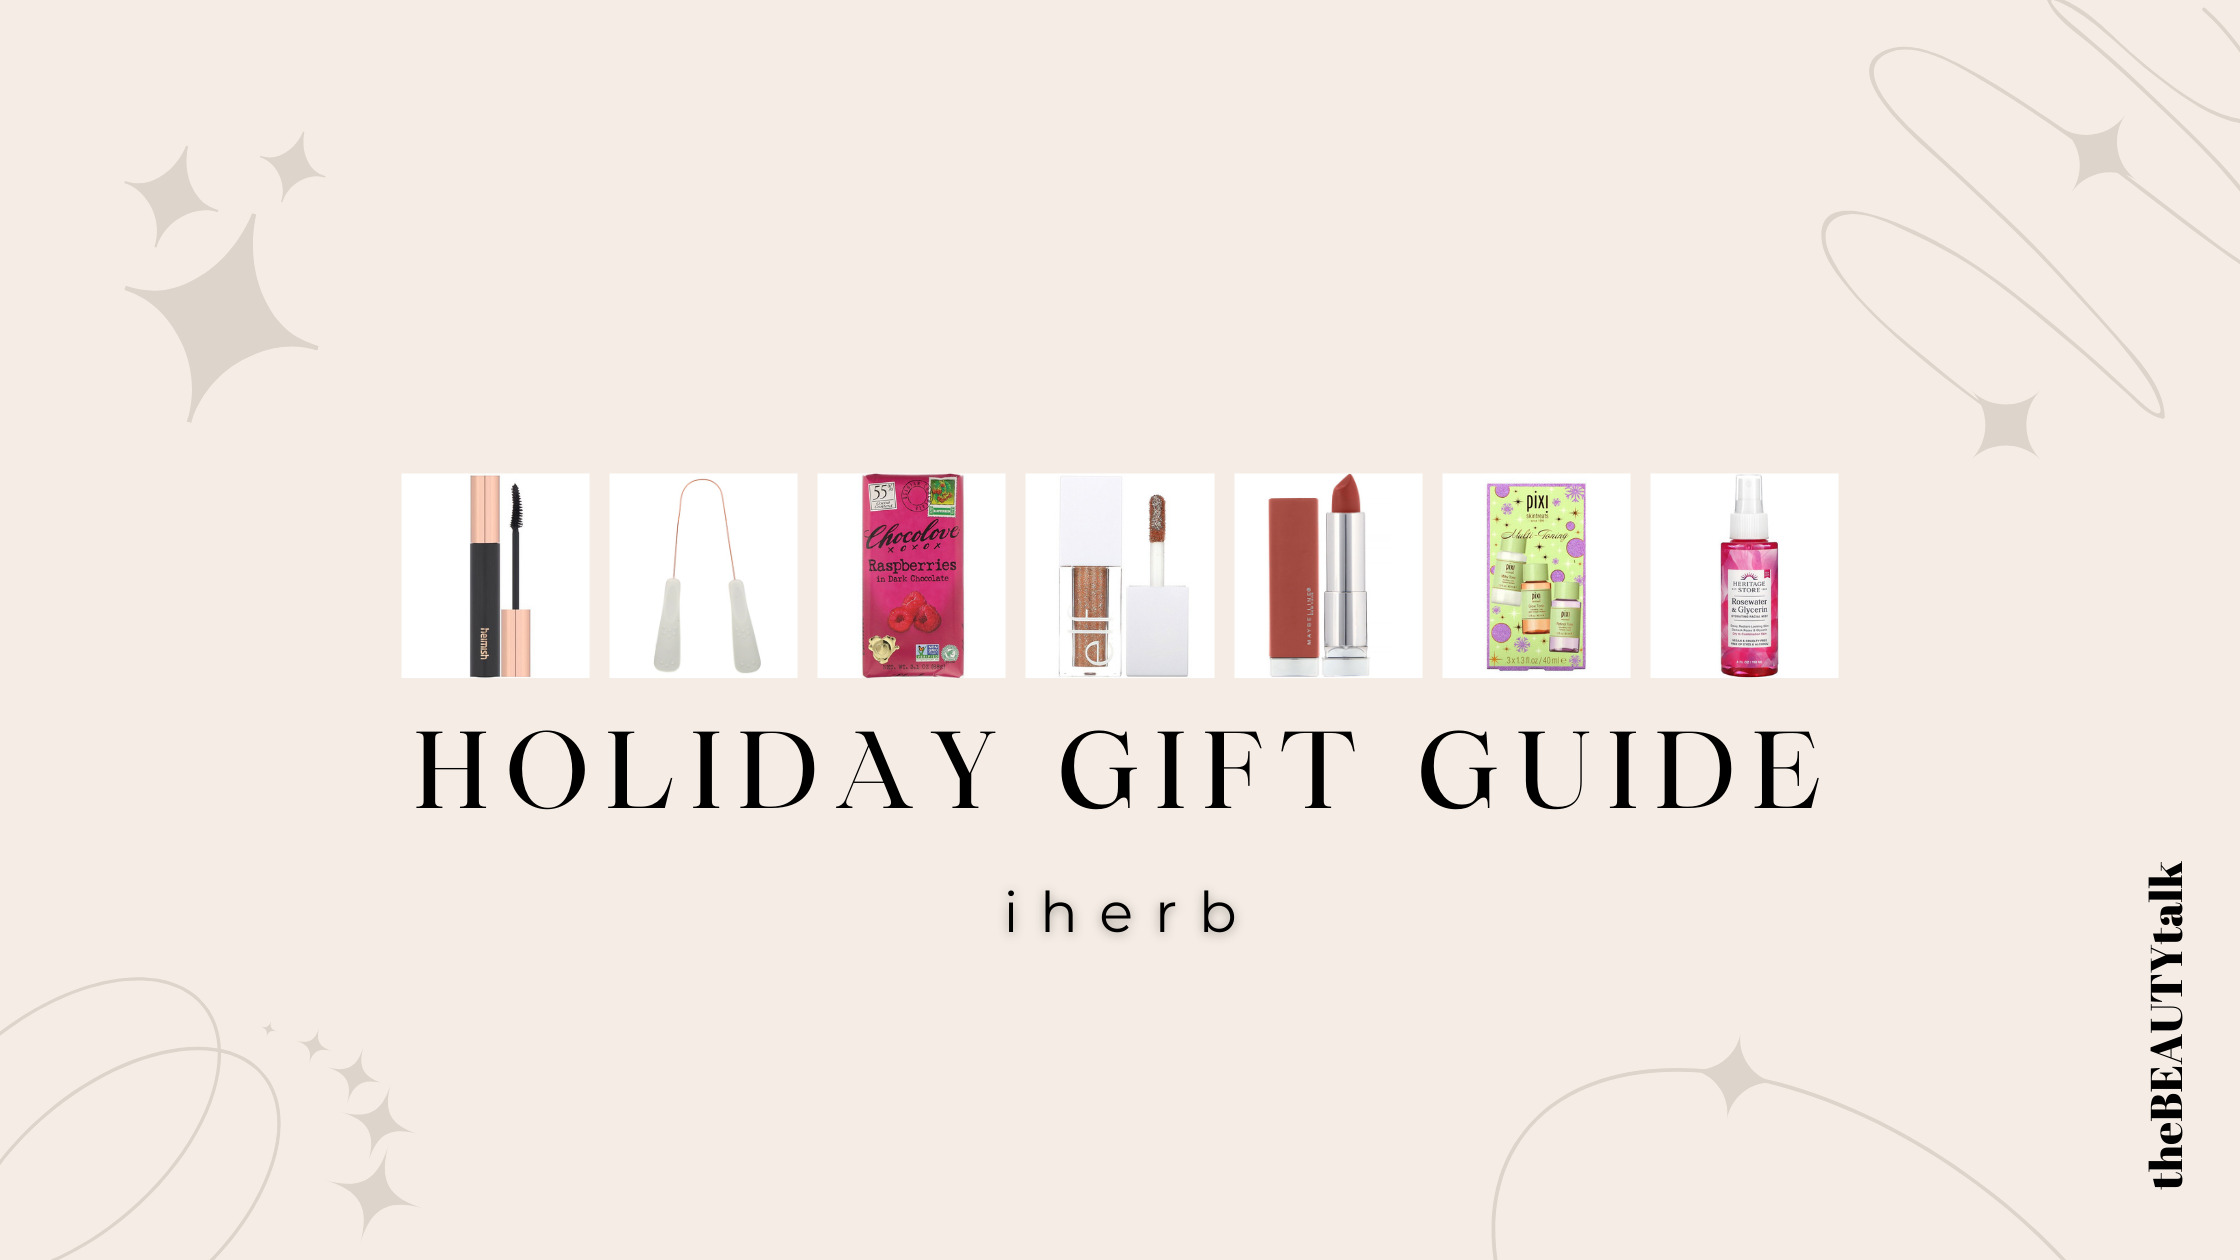 iherb holiday gift guide